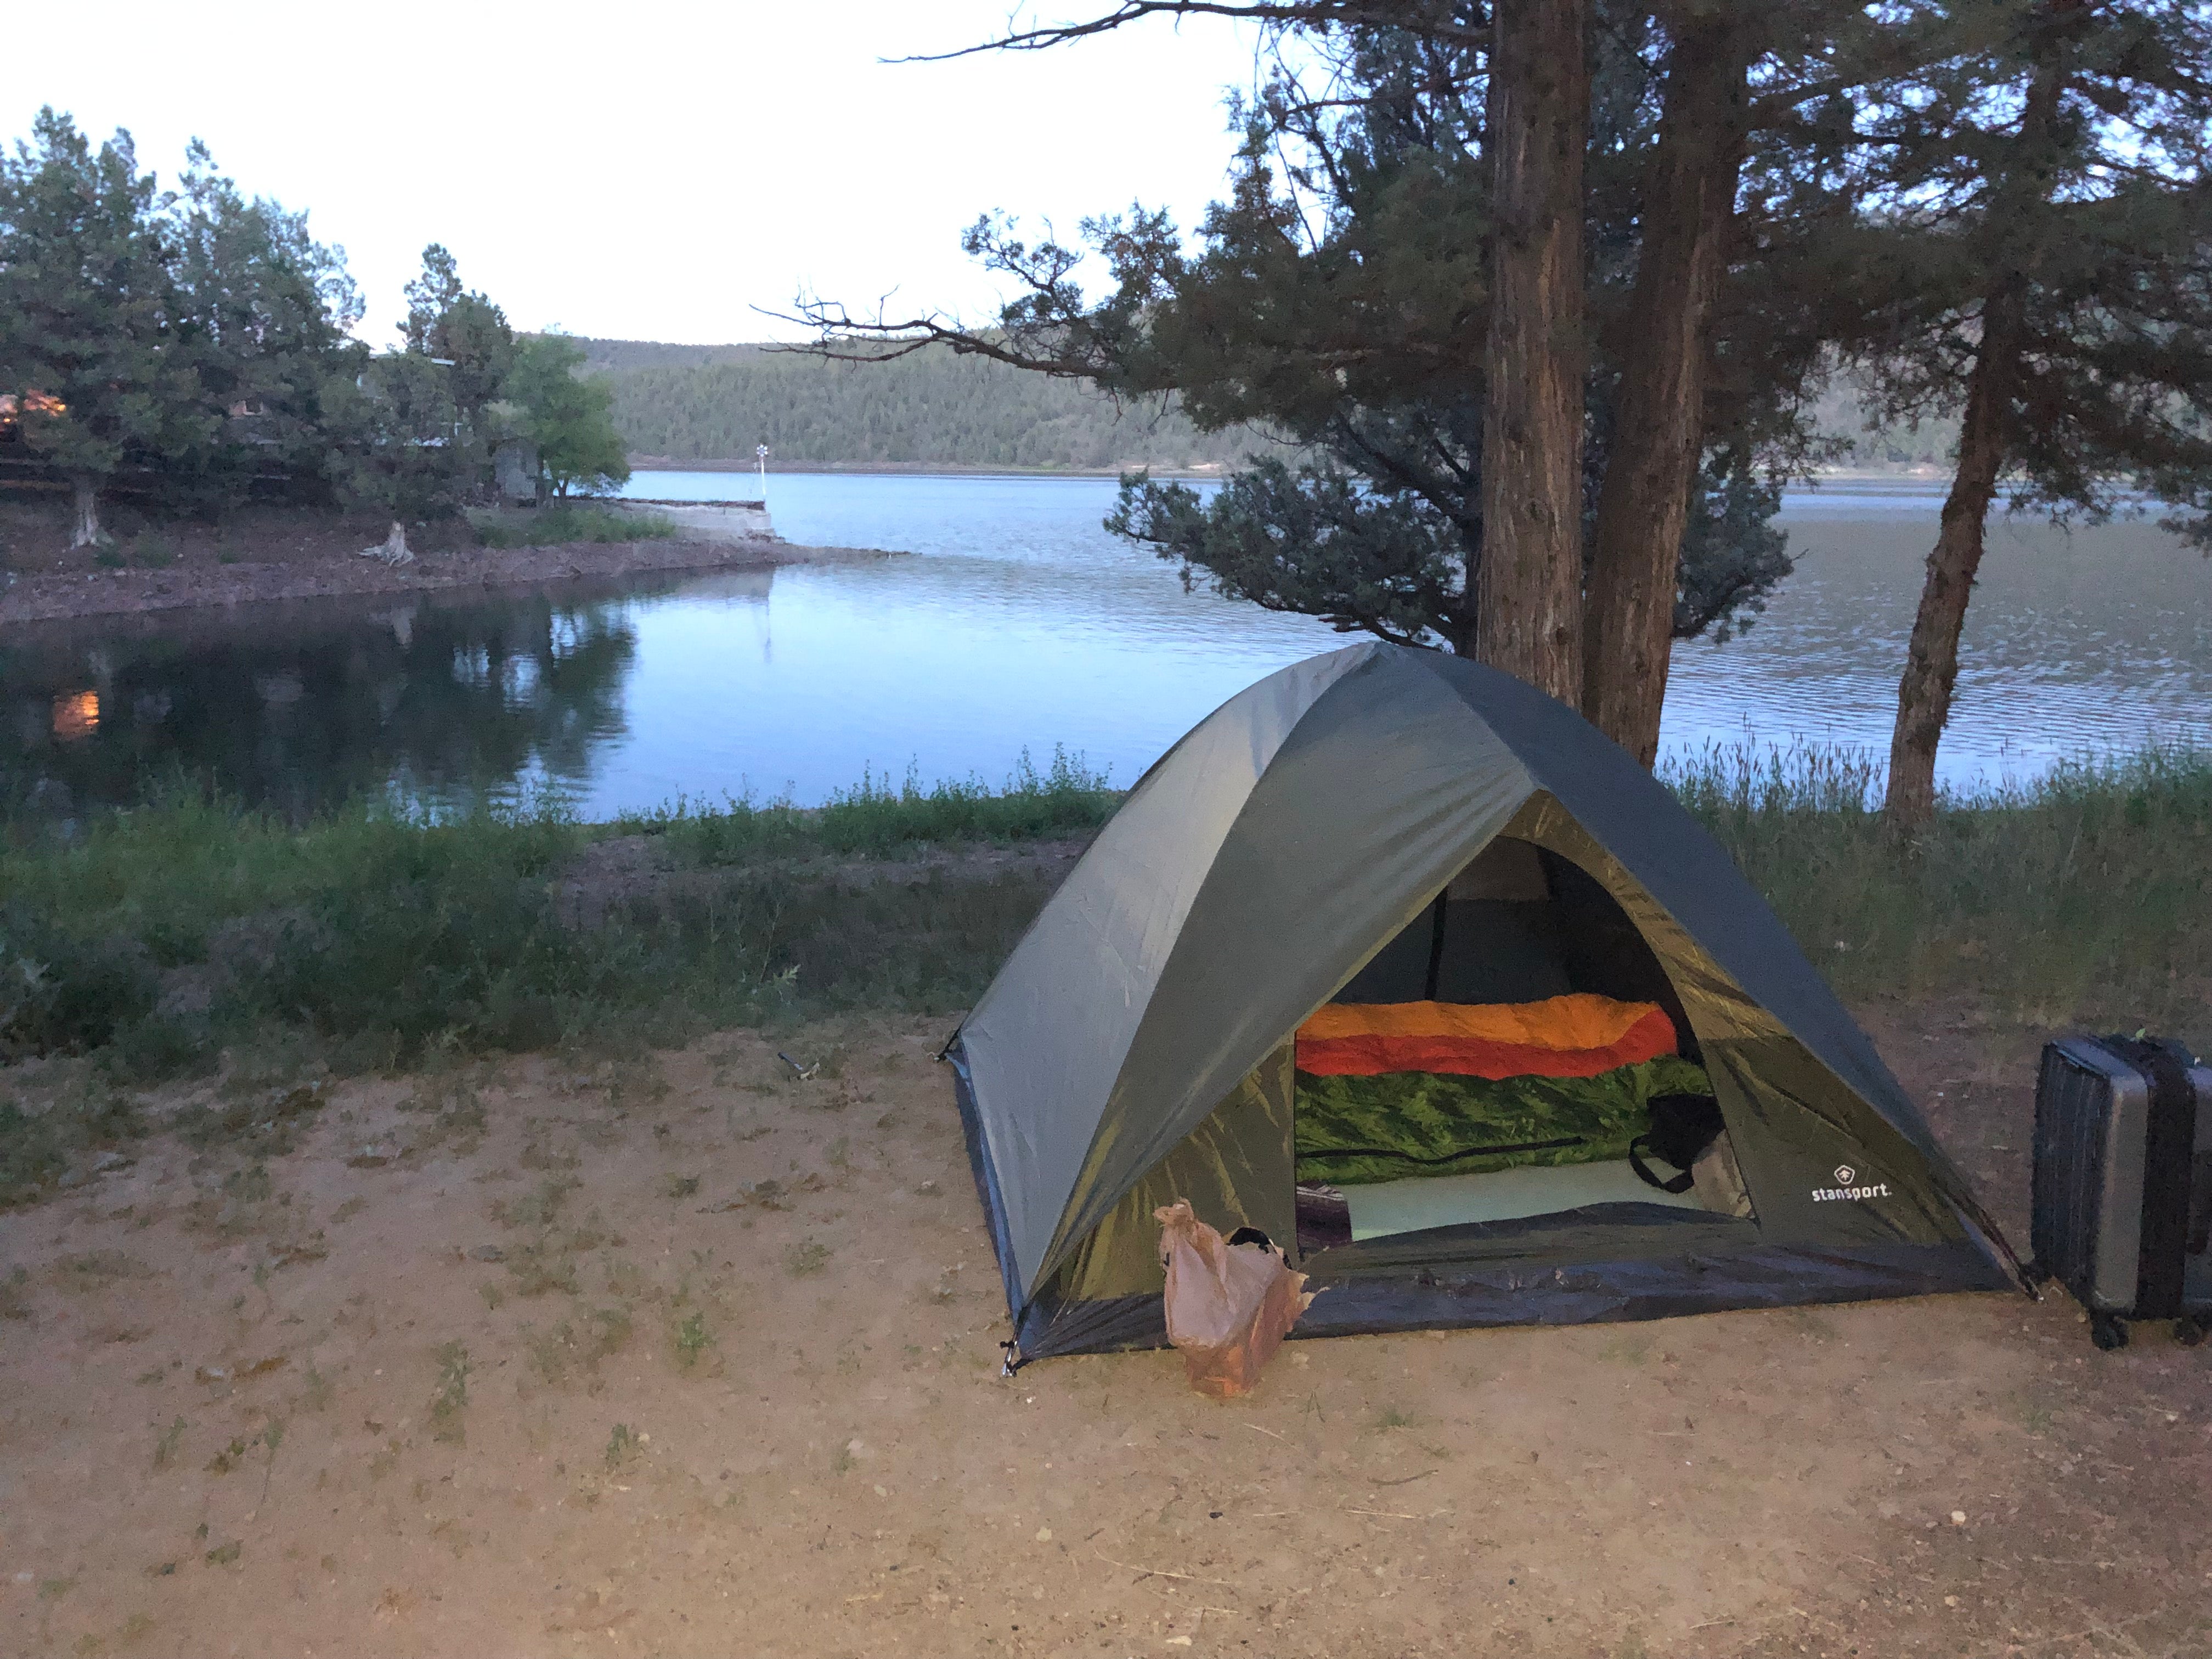 Camper submitted image from Ochoco Lake County Park - 3